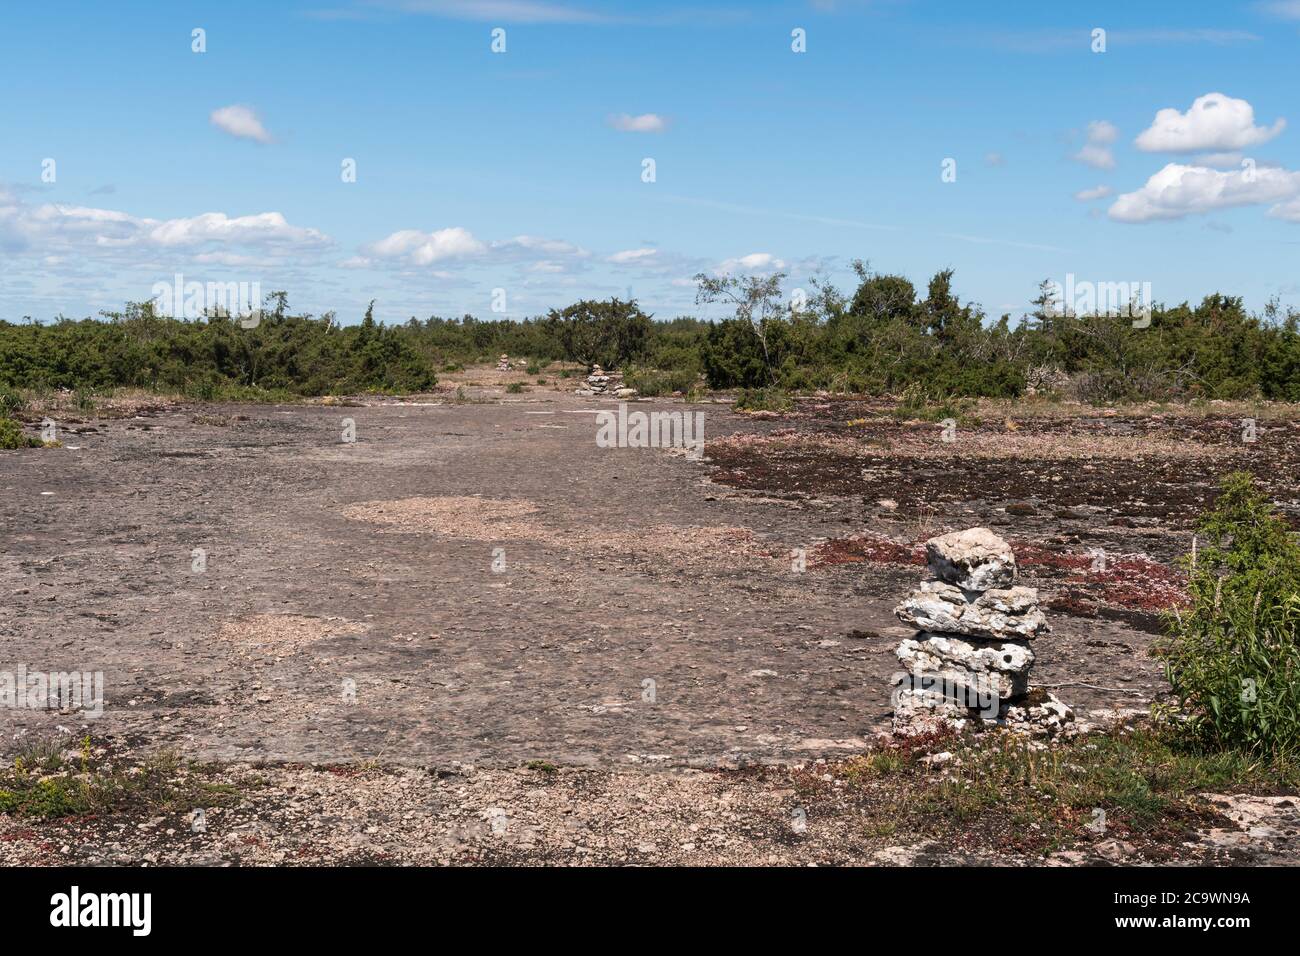 Footpath marked with cairns  in the great plain grassland Stora alvaret on the island Oland in Sweden Stock Photo